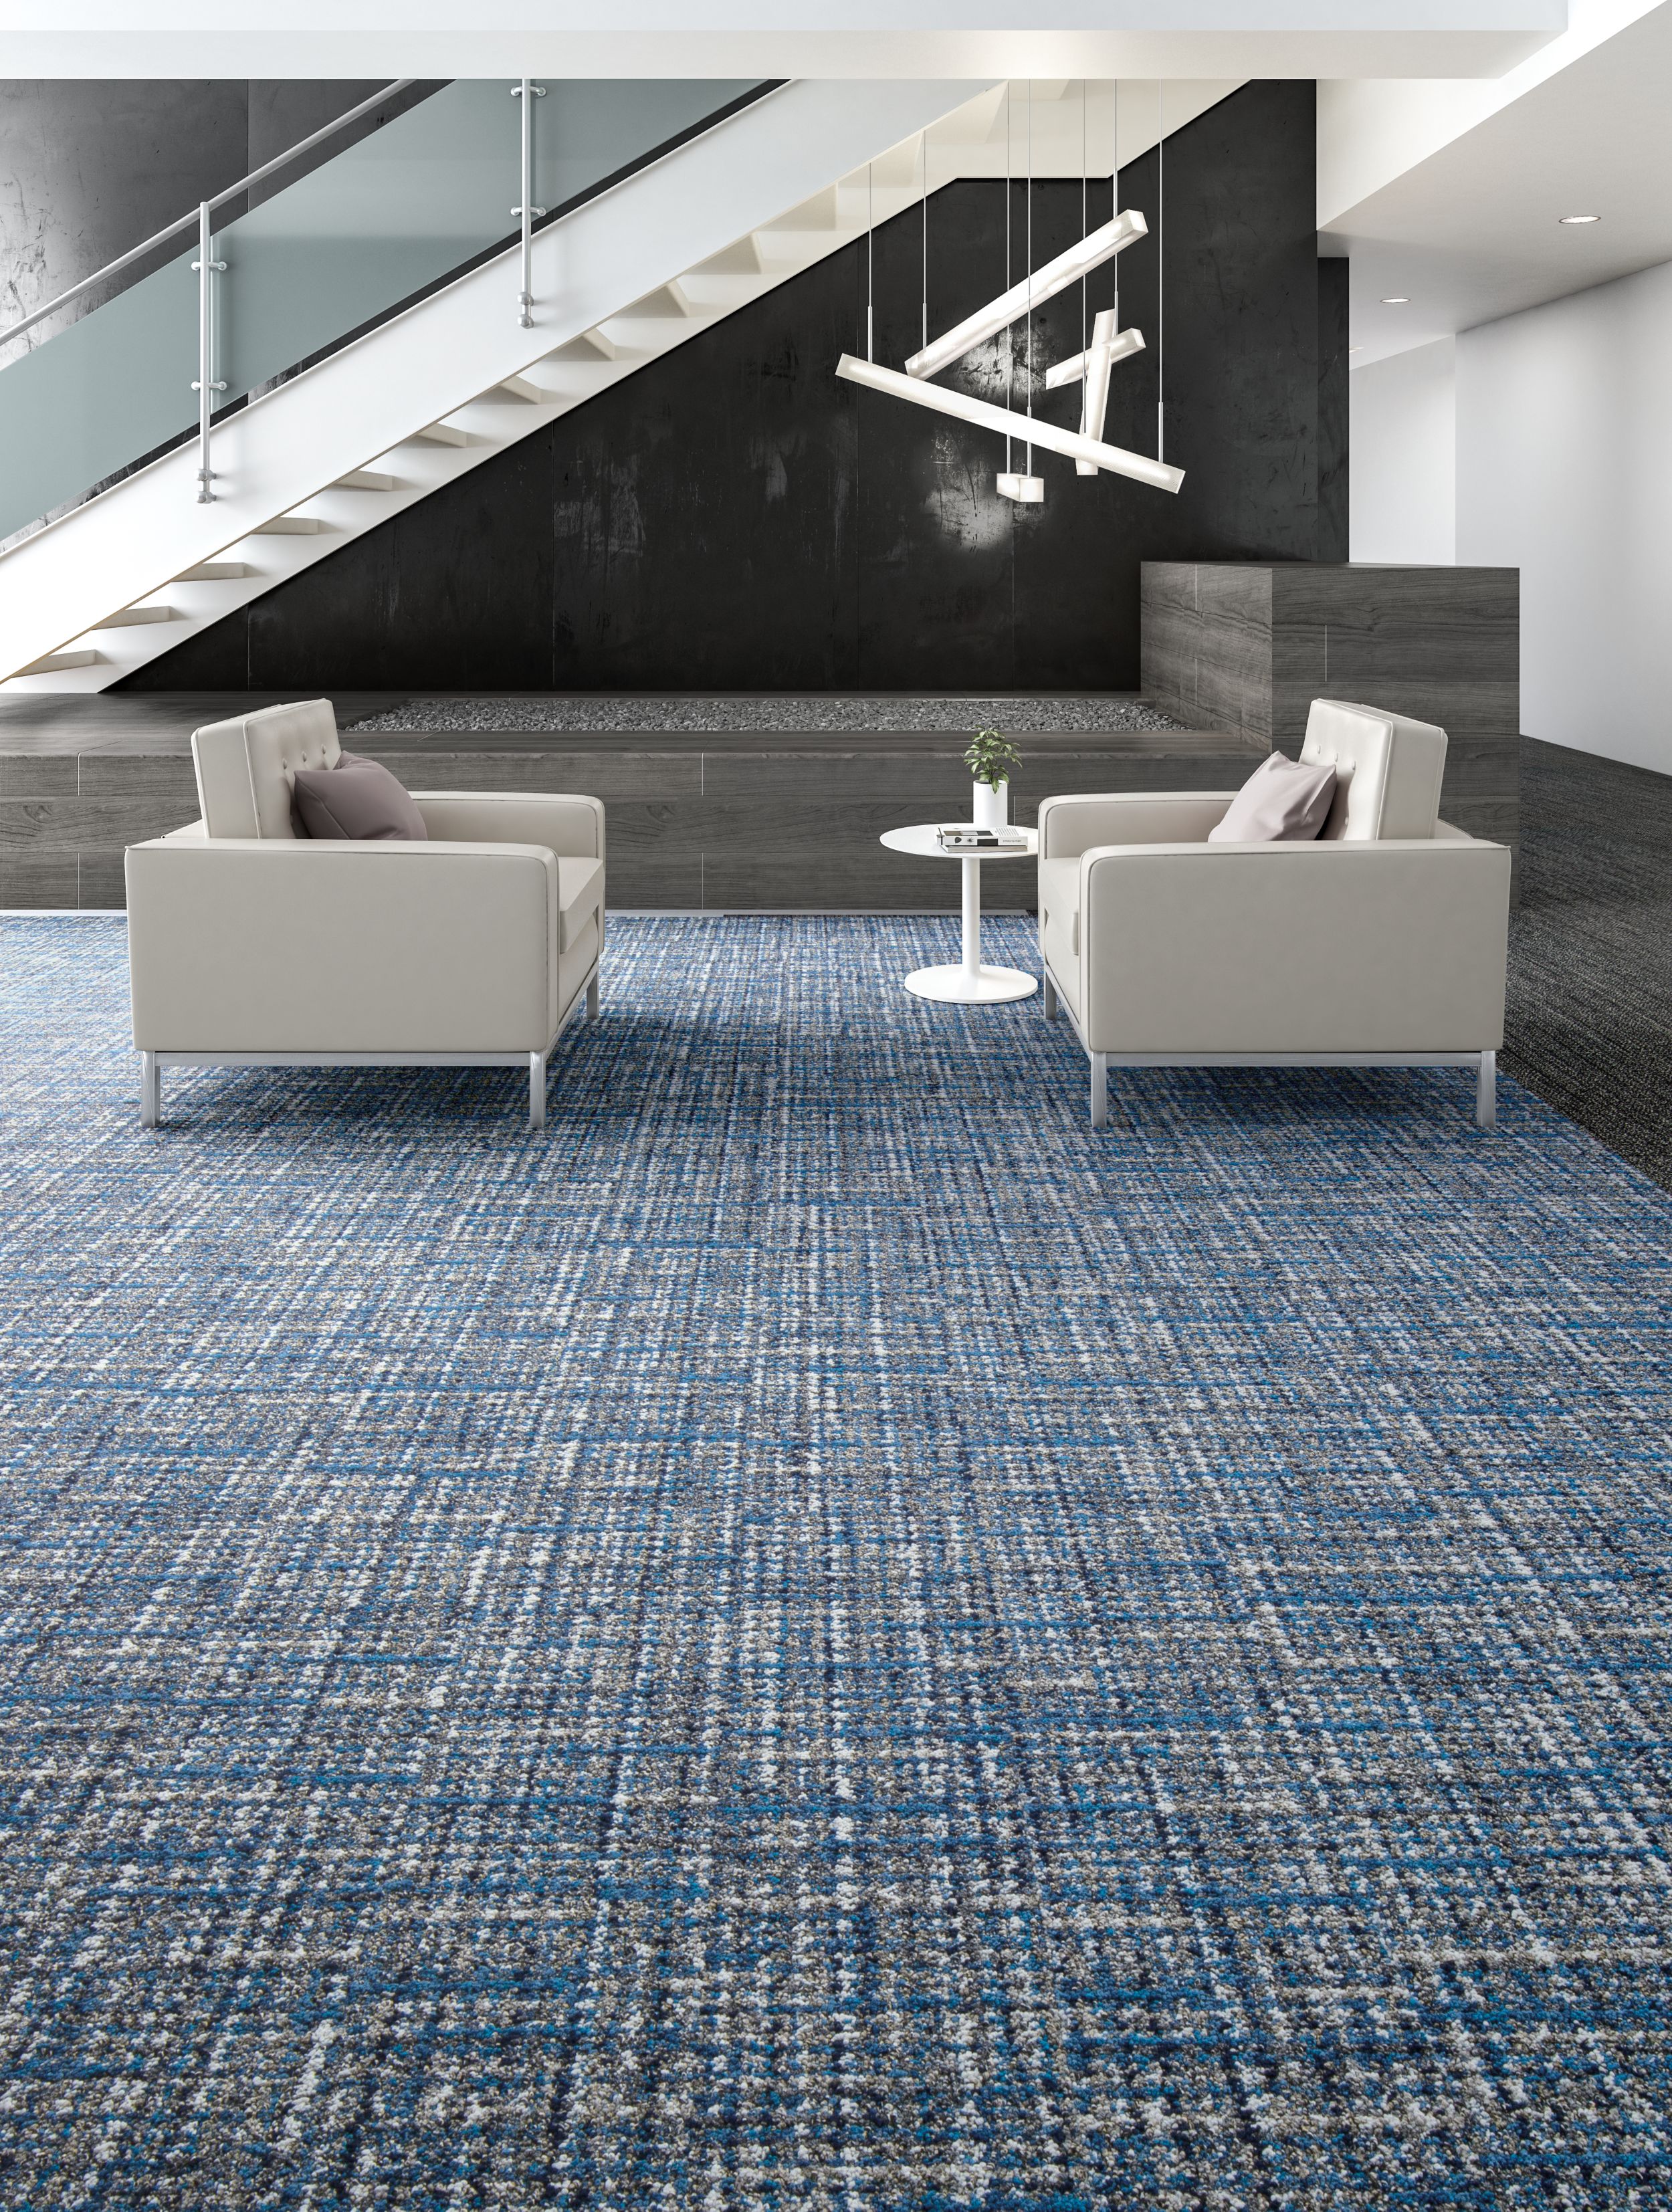 Interface WW895 plank carpet tile in lobby area with couches and side table  número de imagen 8